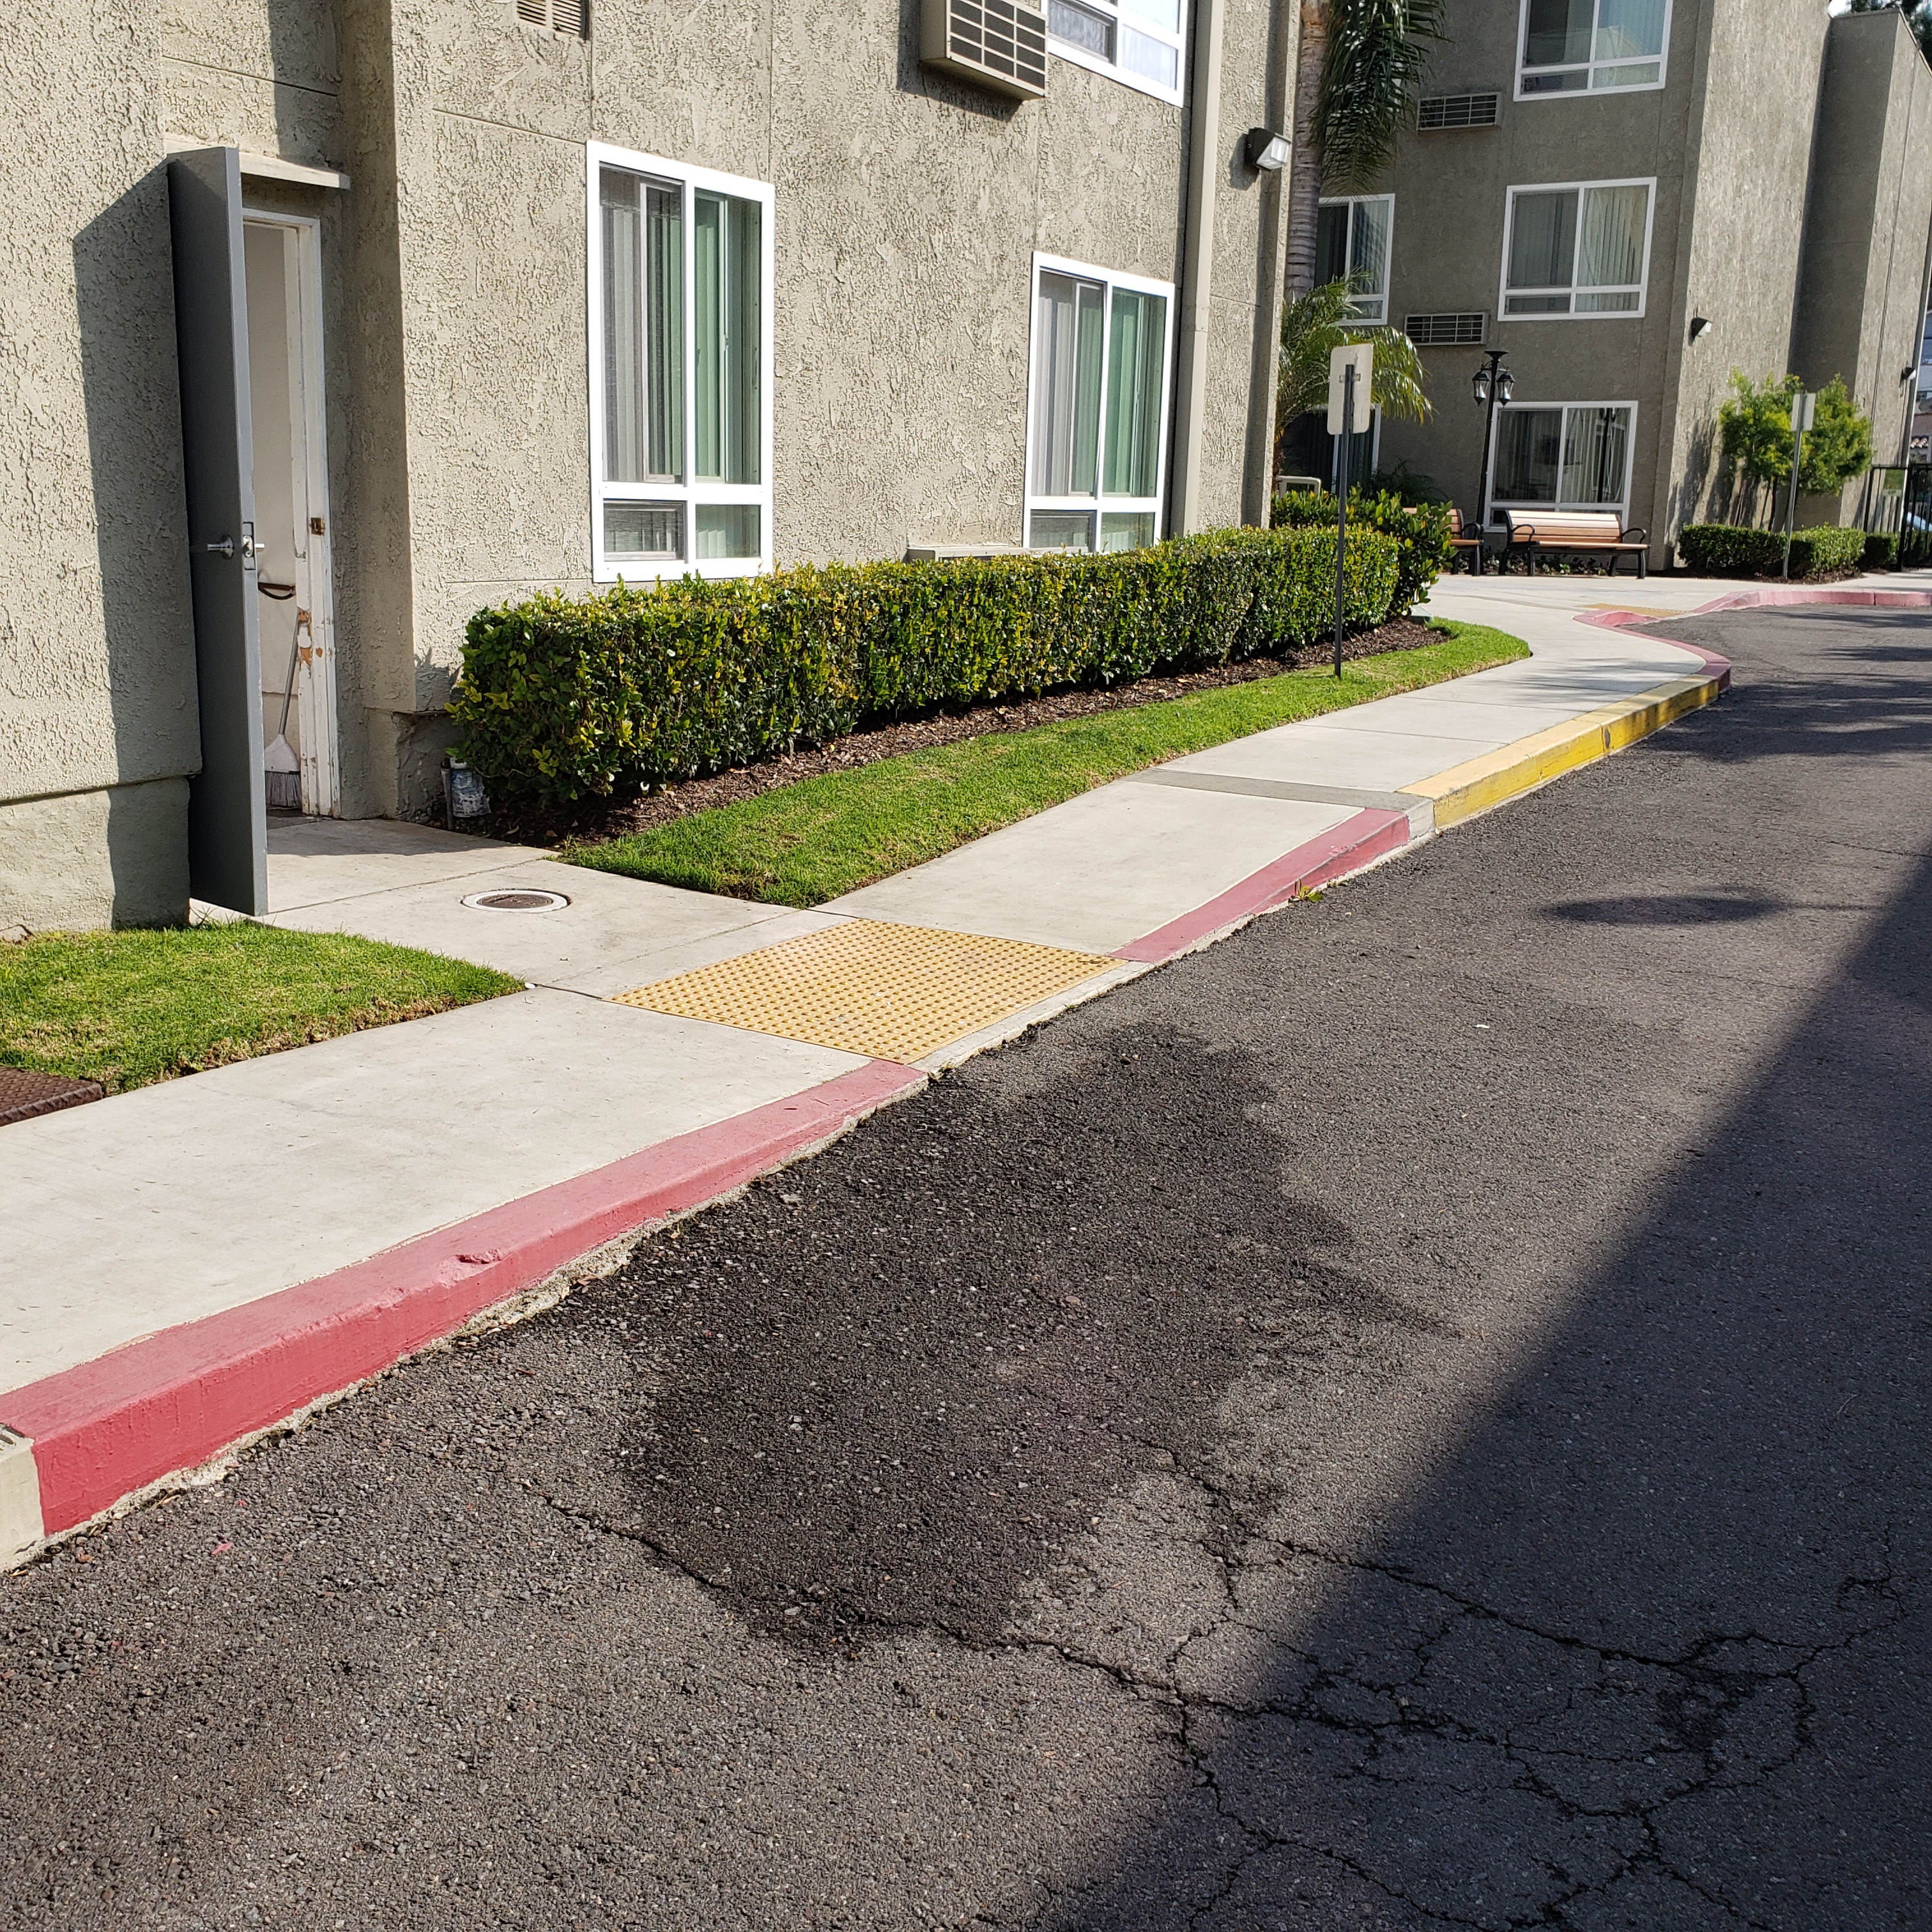 Image of tres lomas garden apartments travel path. building lined with bushes/ curbside painted red with accessible path into building